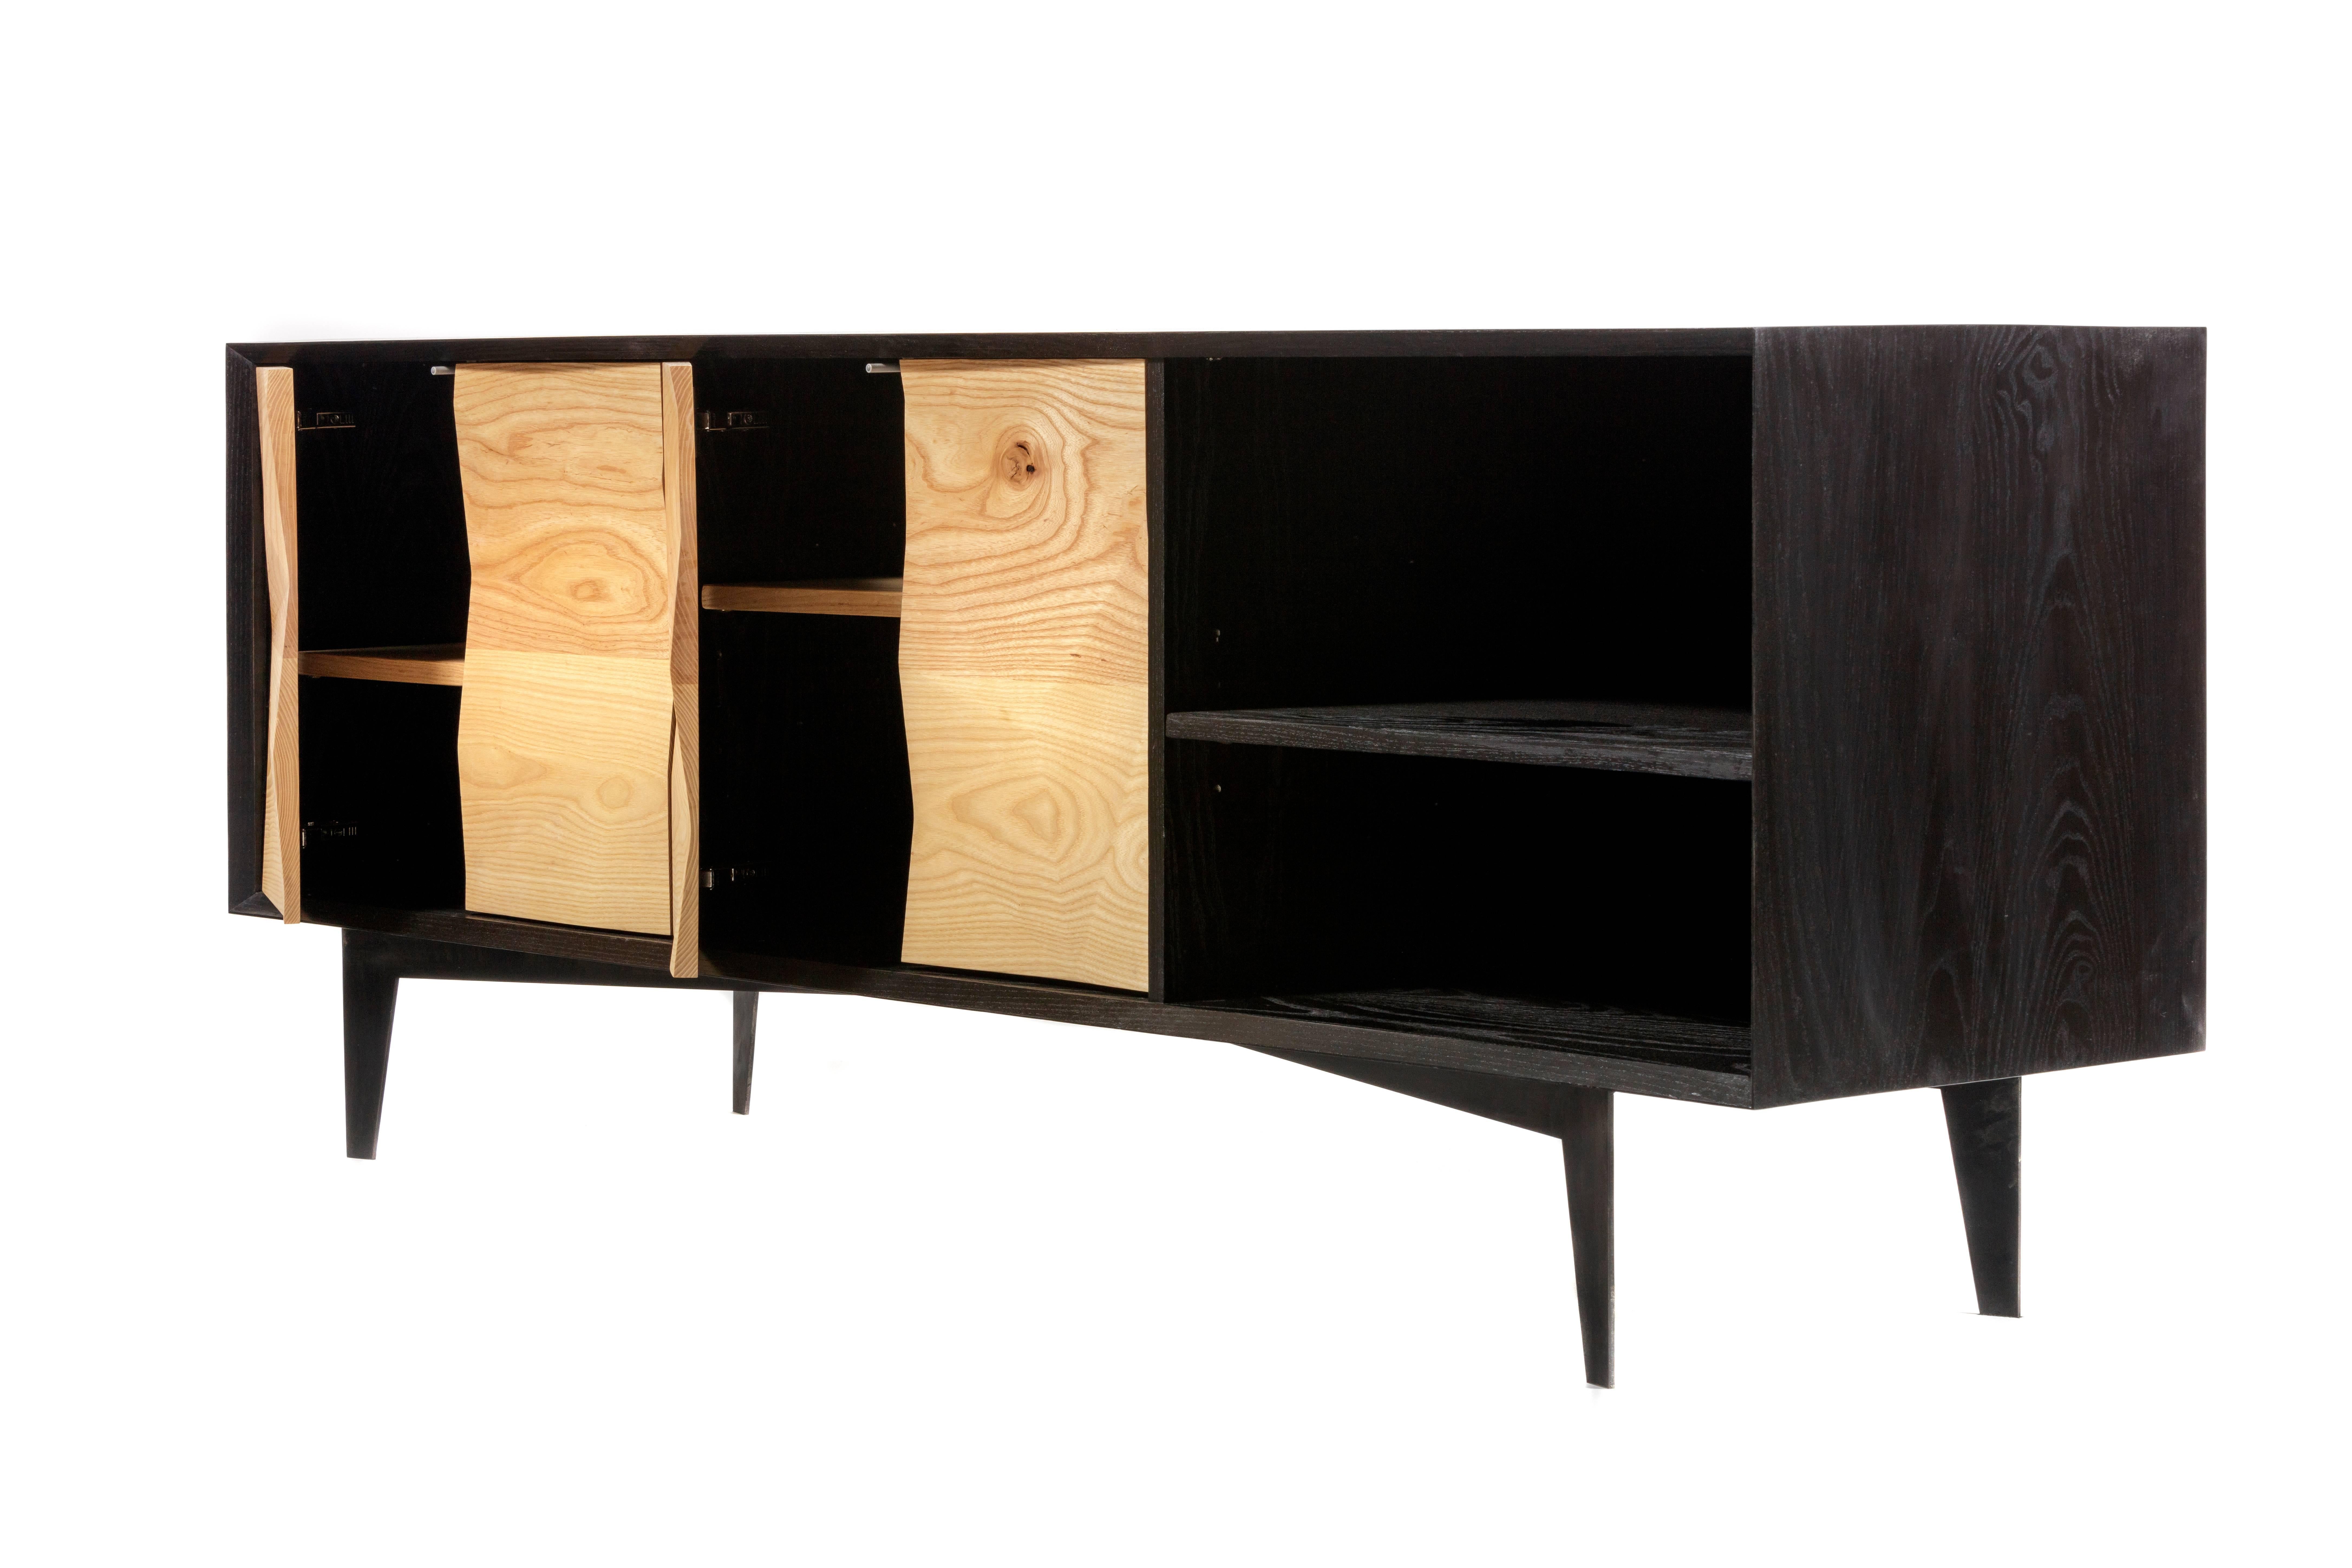 Our Westchester credenza was derived from the variations of ice crystals on Westchester Lagoon in southeast Alaska. The ebonized ash credenza incorporates custom fabricated ash doors to mimic the variations and complexities of natural surfaces. The